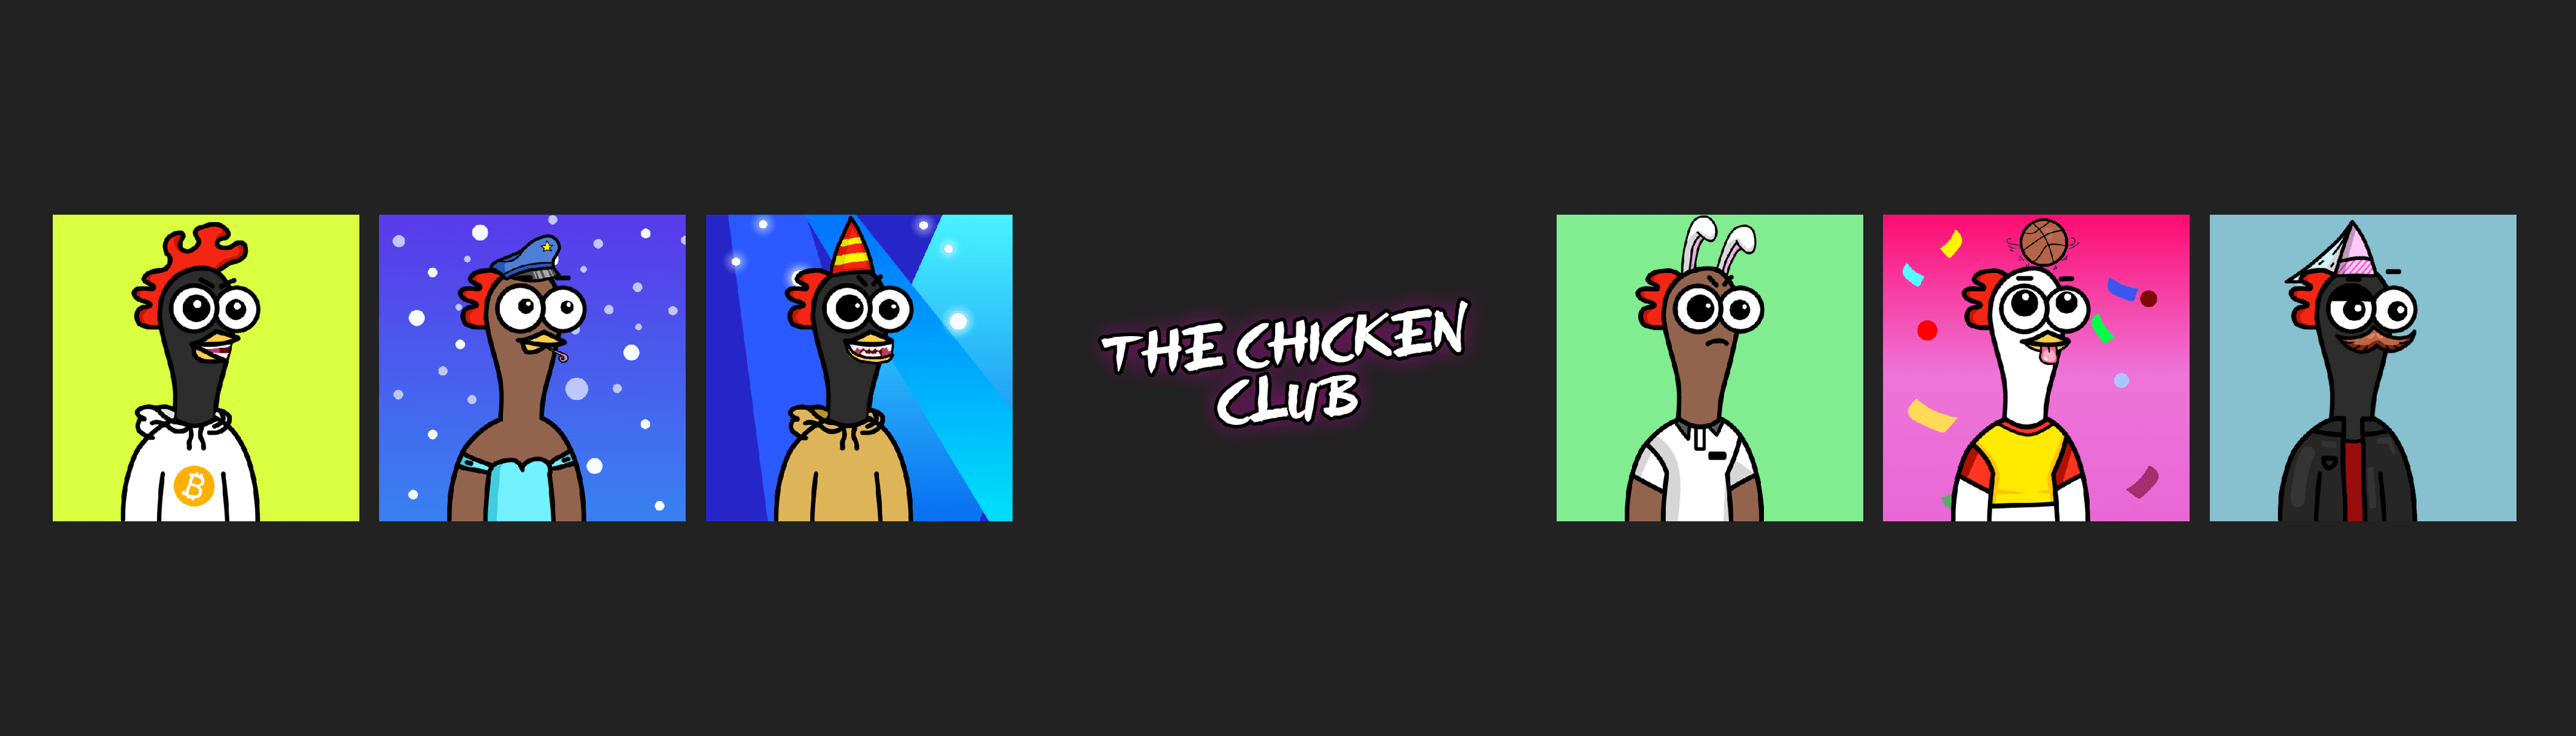 TheChickenClub banner